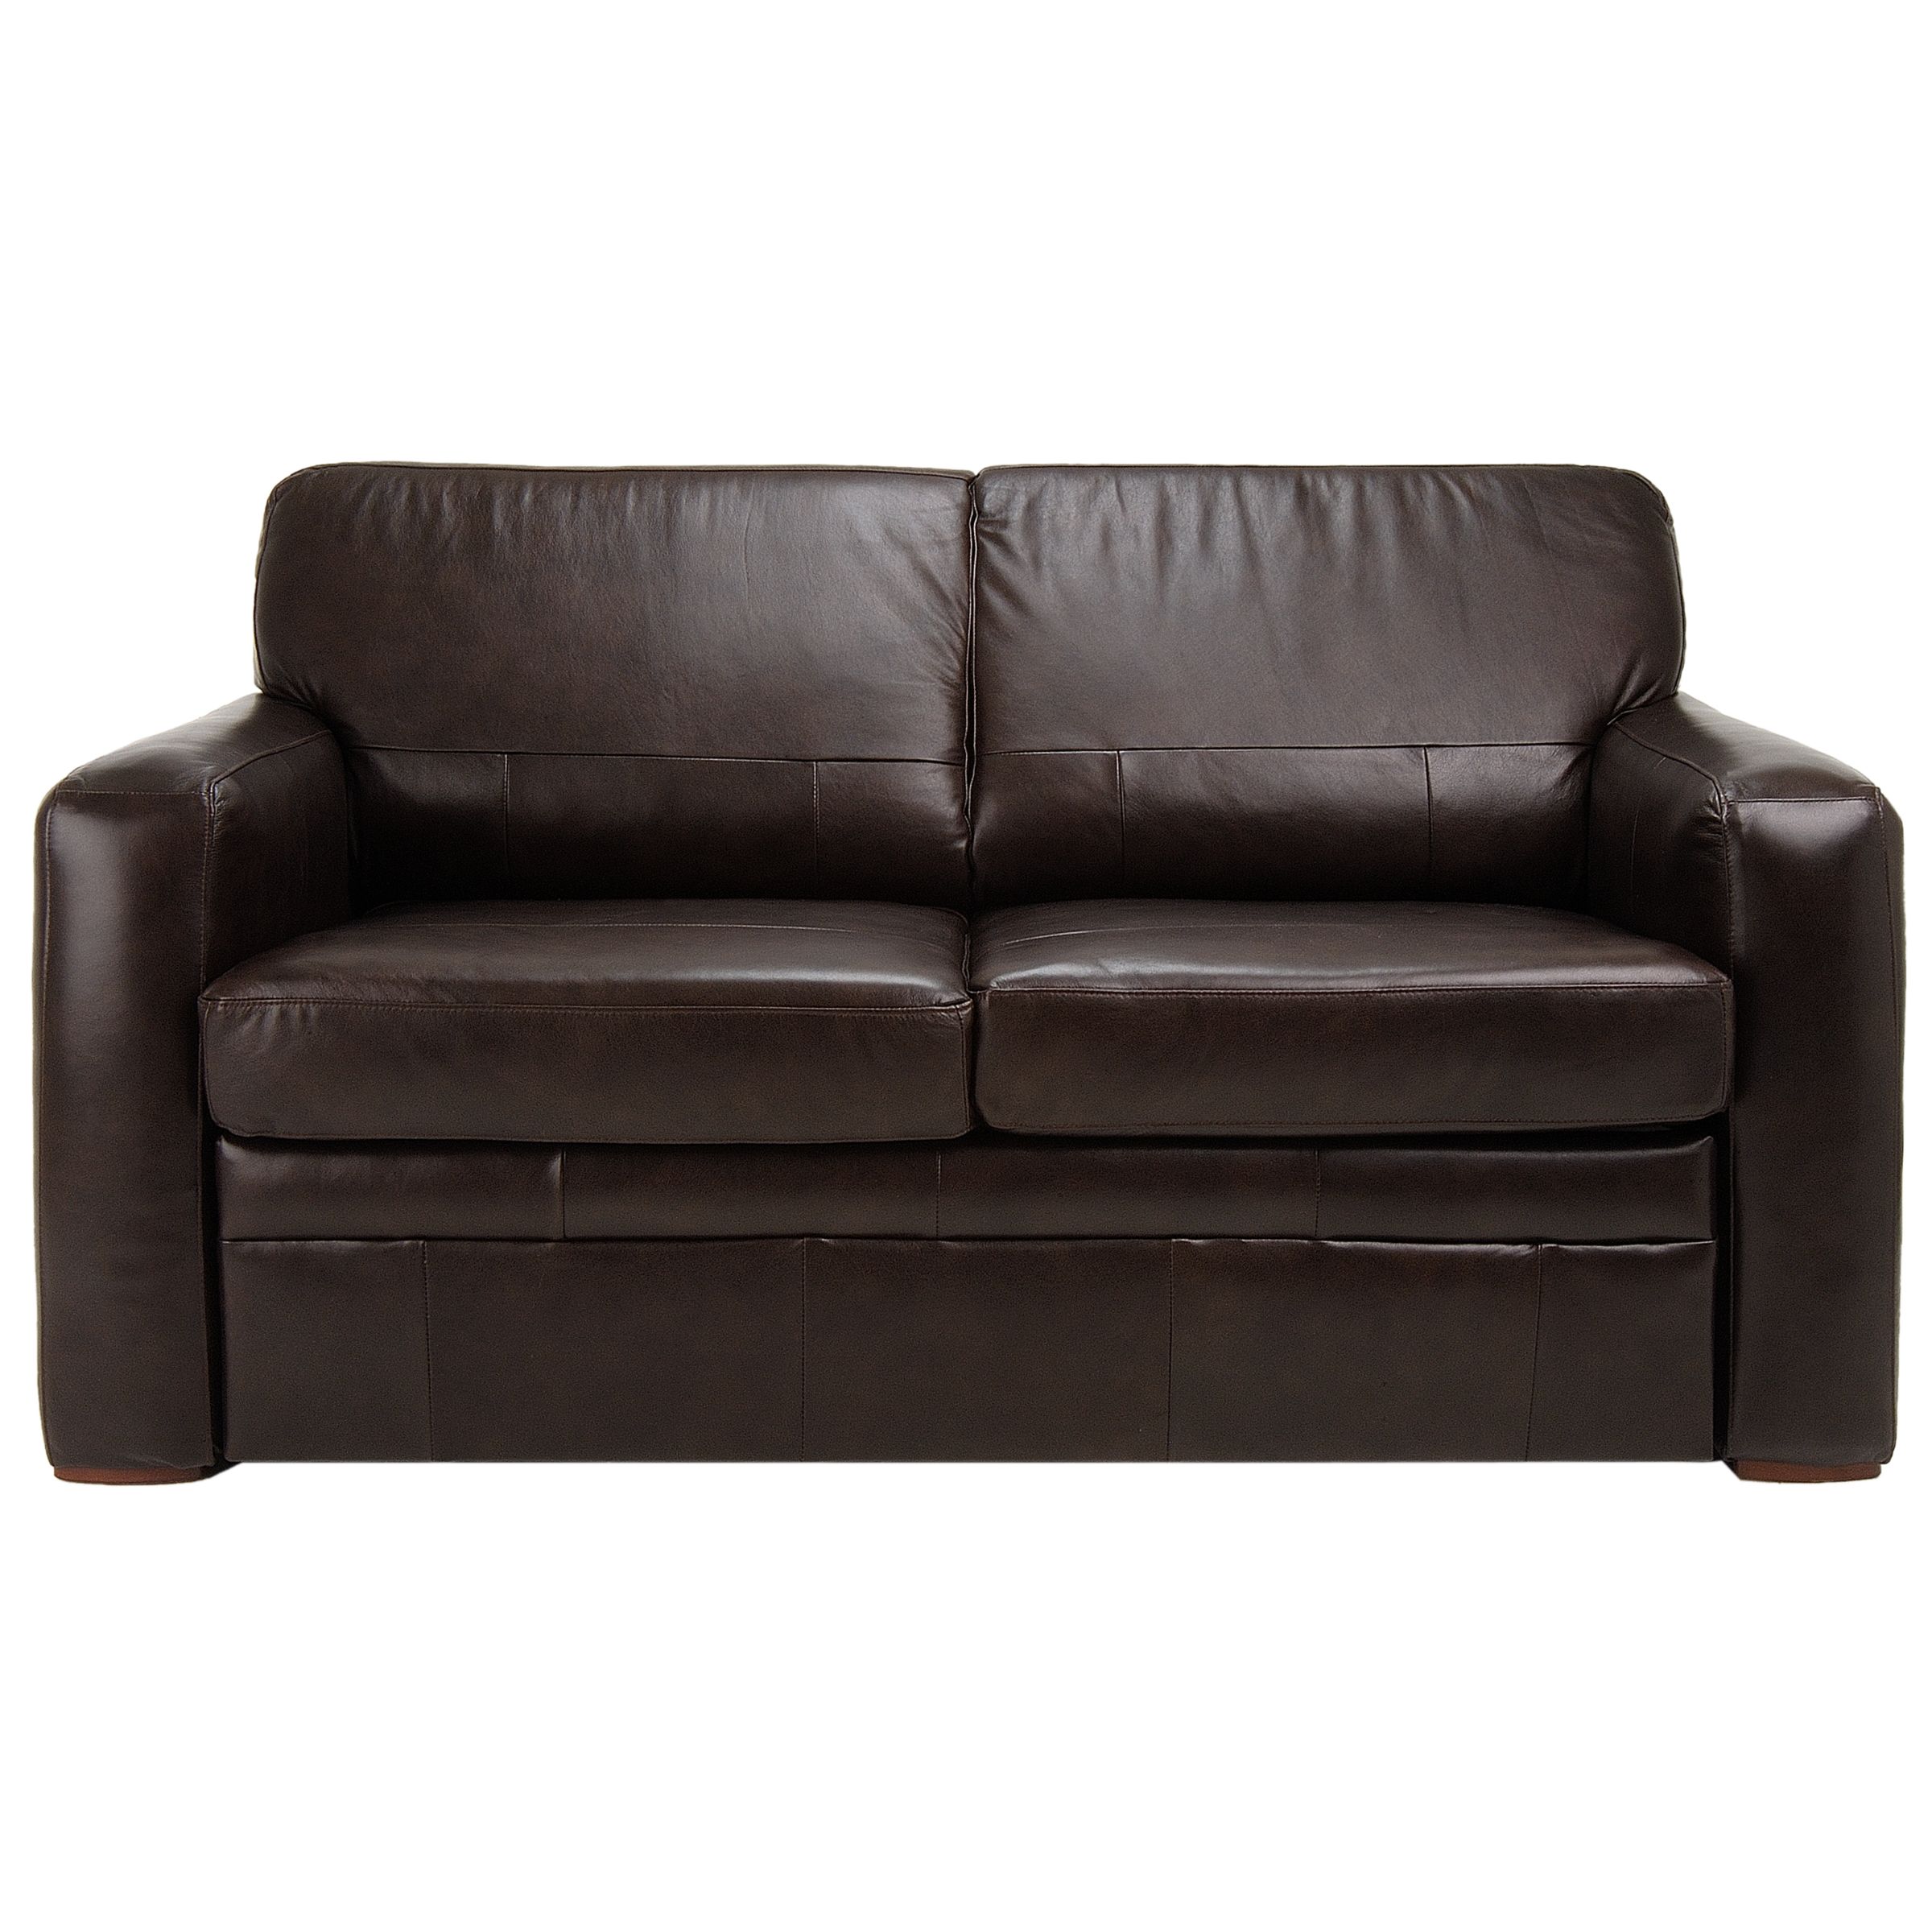 Scoop Leather Sofa Bed, Bitter Chocolate